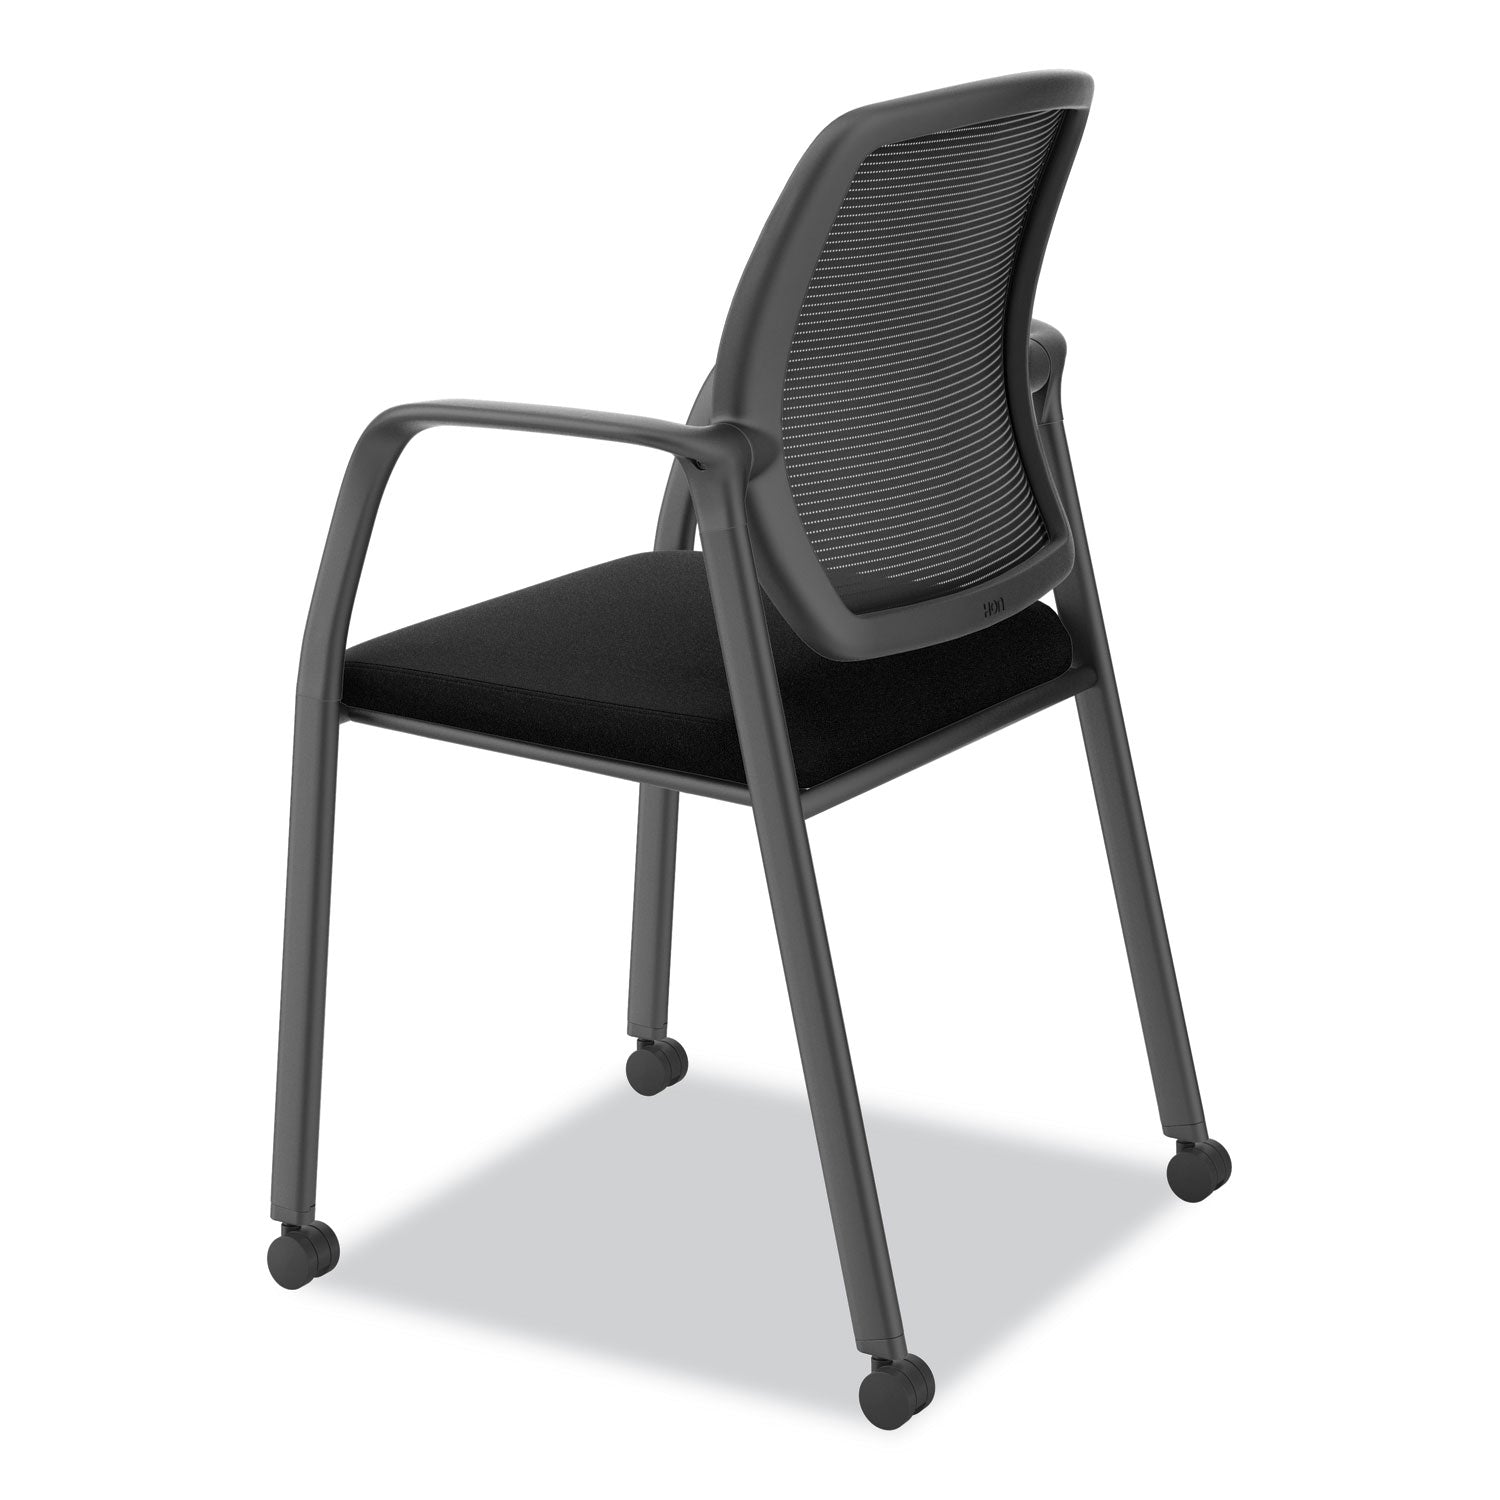 nucleus-series-recharge-guest-chair-supports-up-to-300-lb-1762-seat-height-black-seat-back-black-base_honnr6fmc10p71 - 4